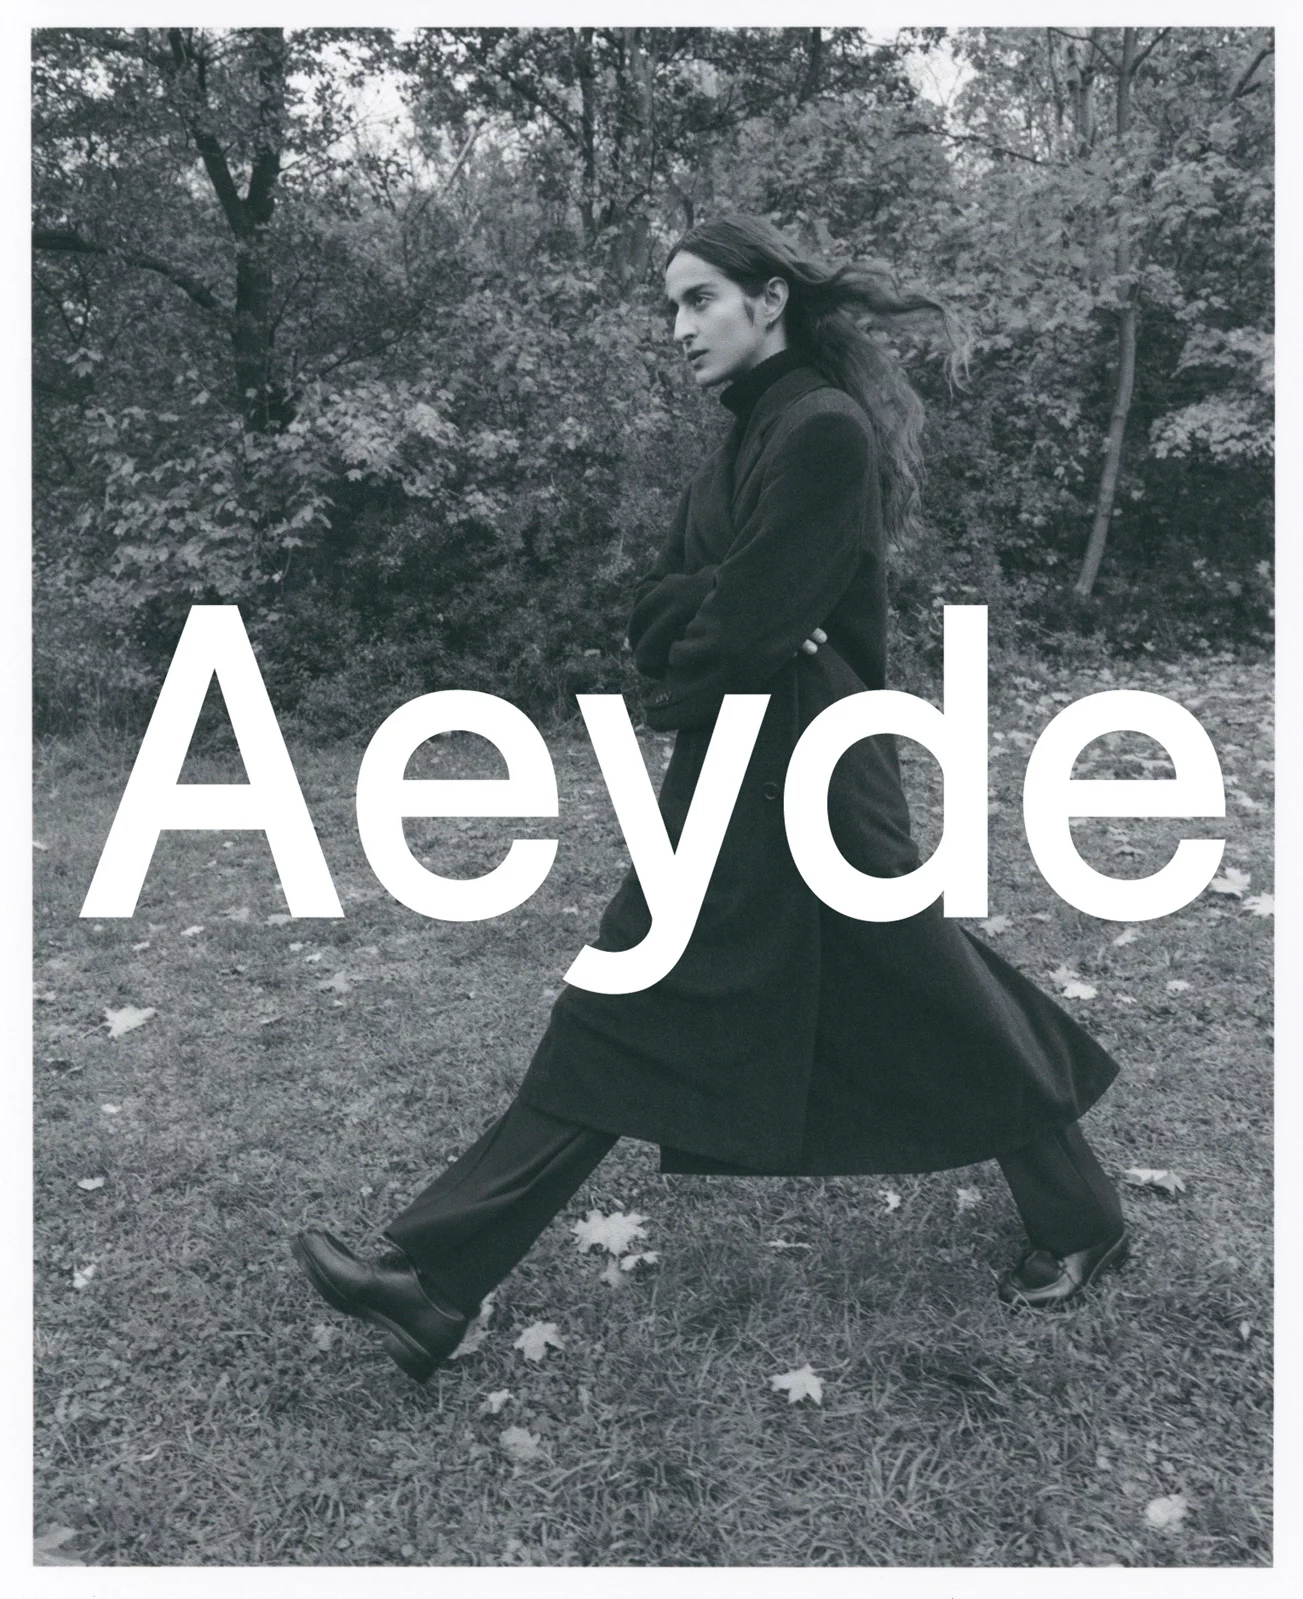 Aeyde 1 by Ferry MOHR